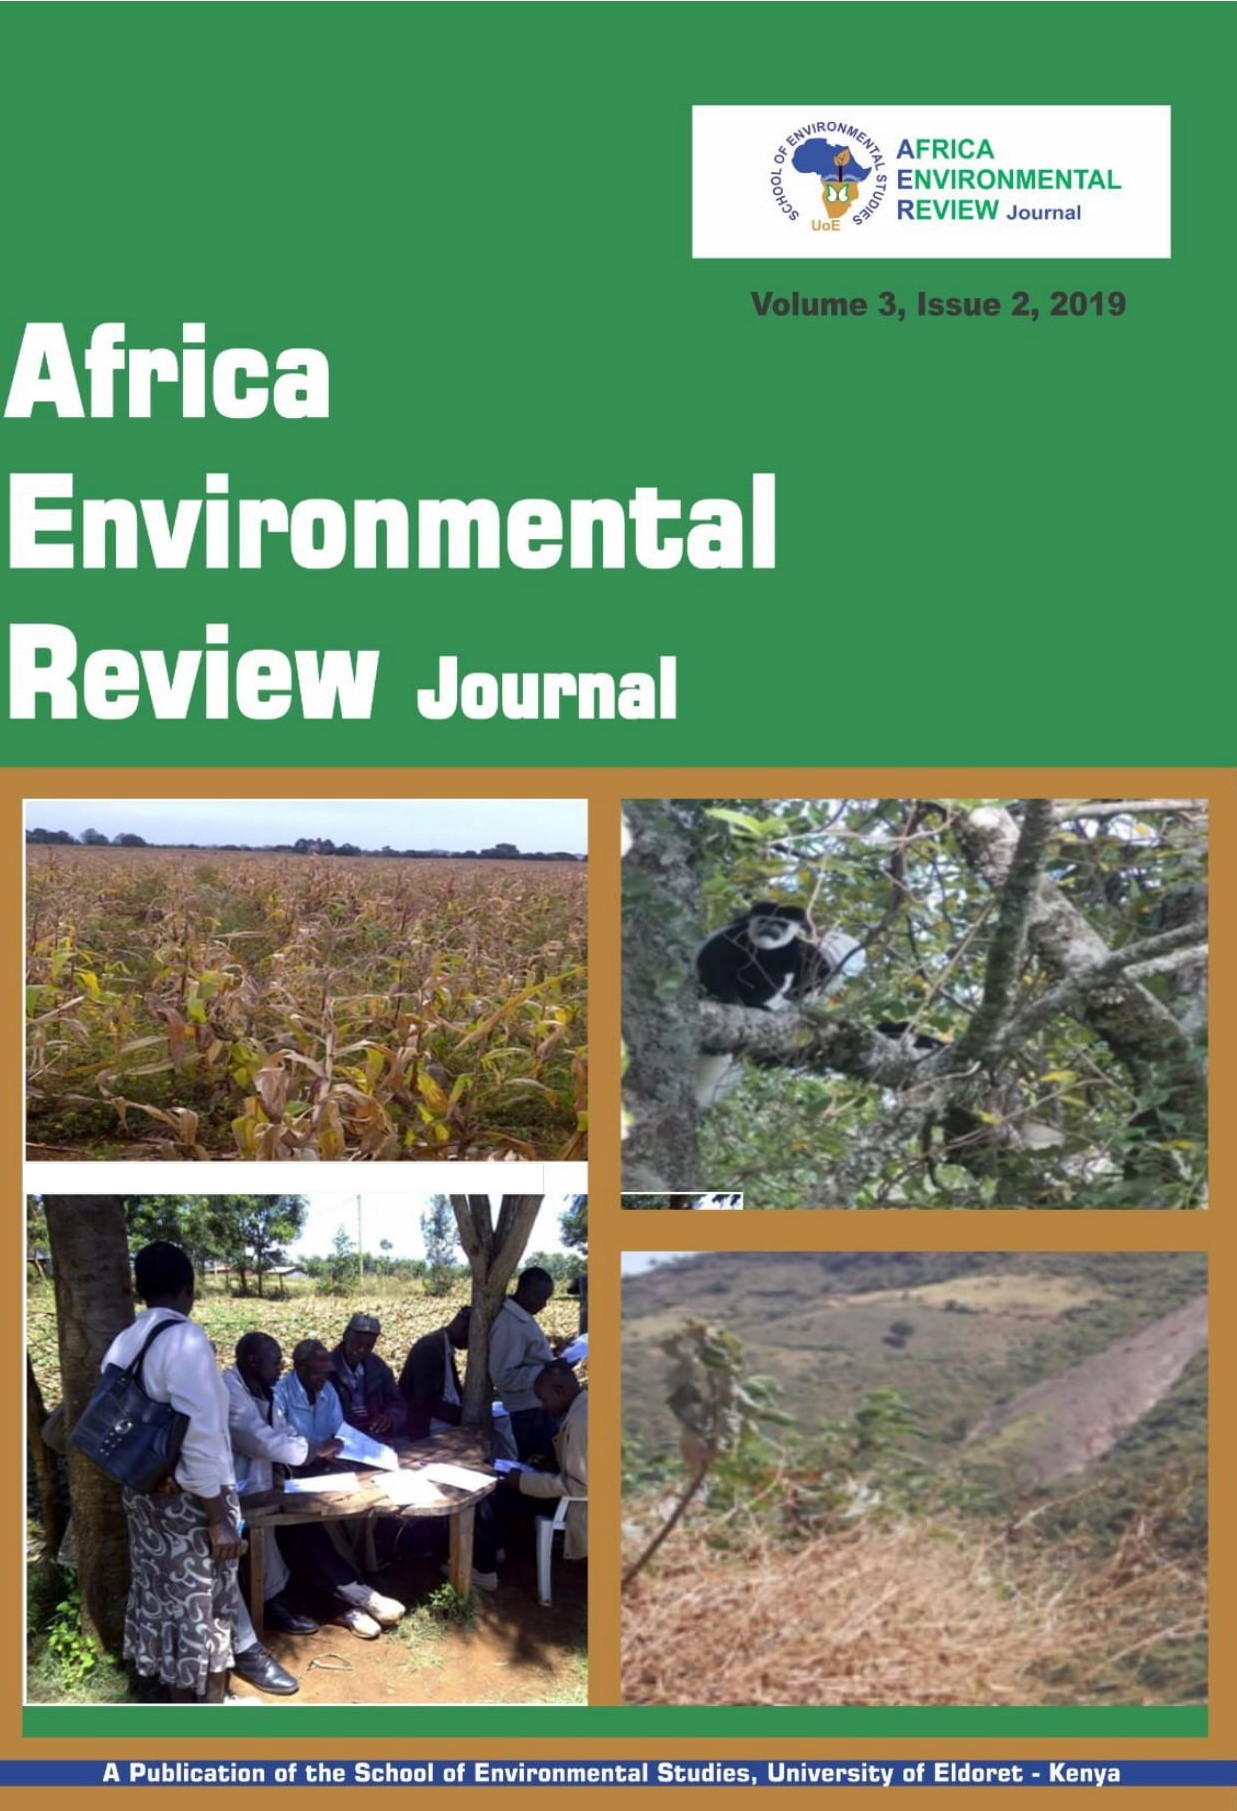 					View Vol. 3 No. 2 (2019): African Environmental Review Journal
				